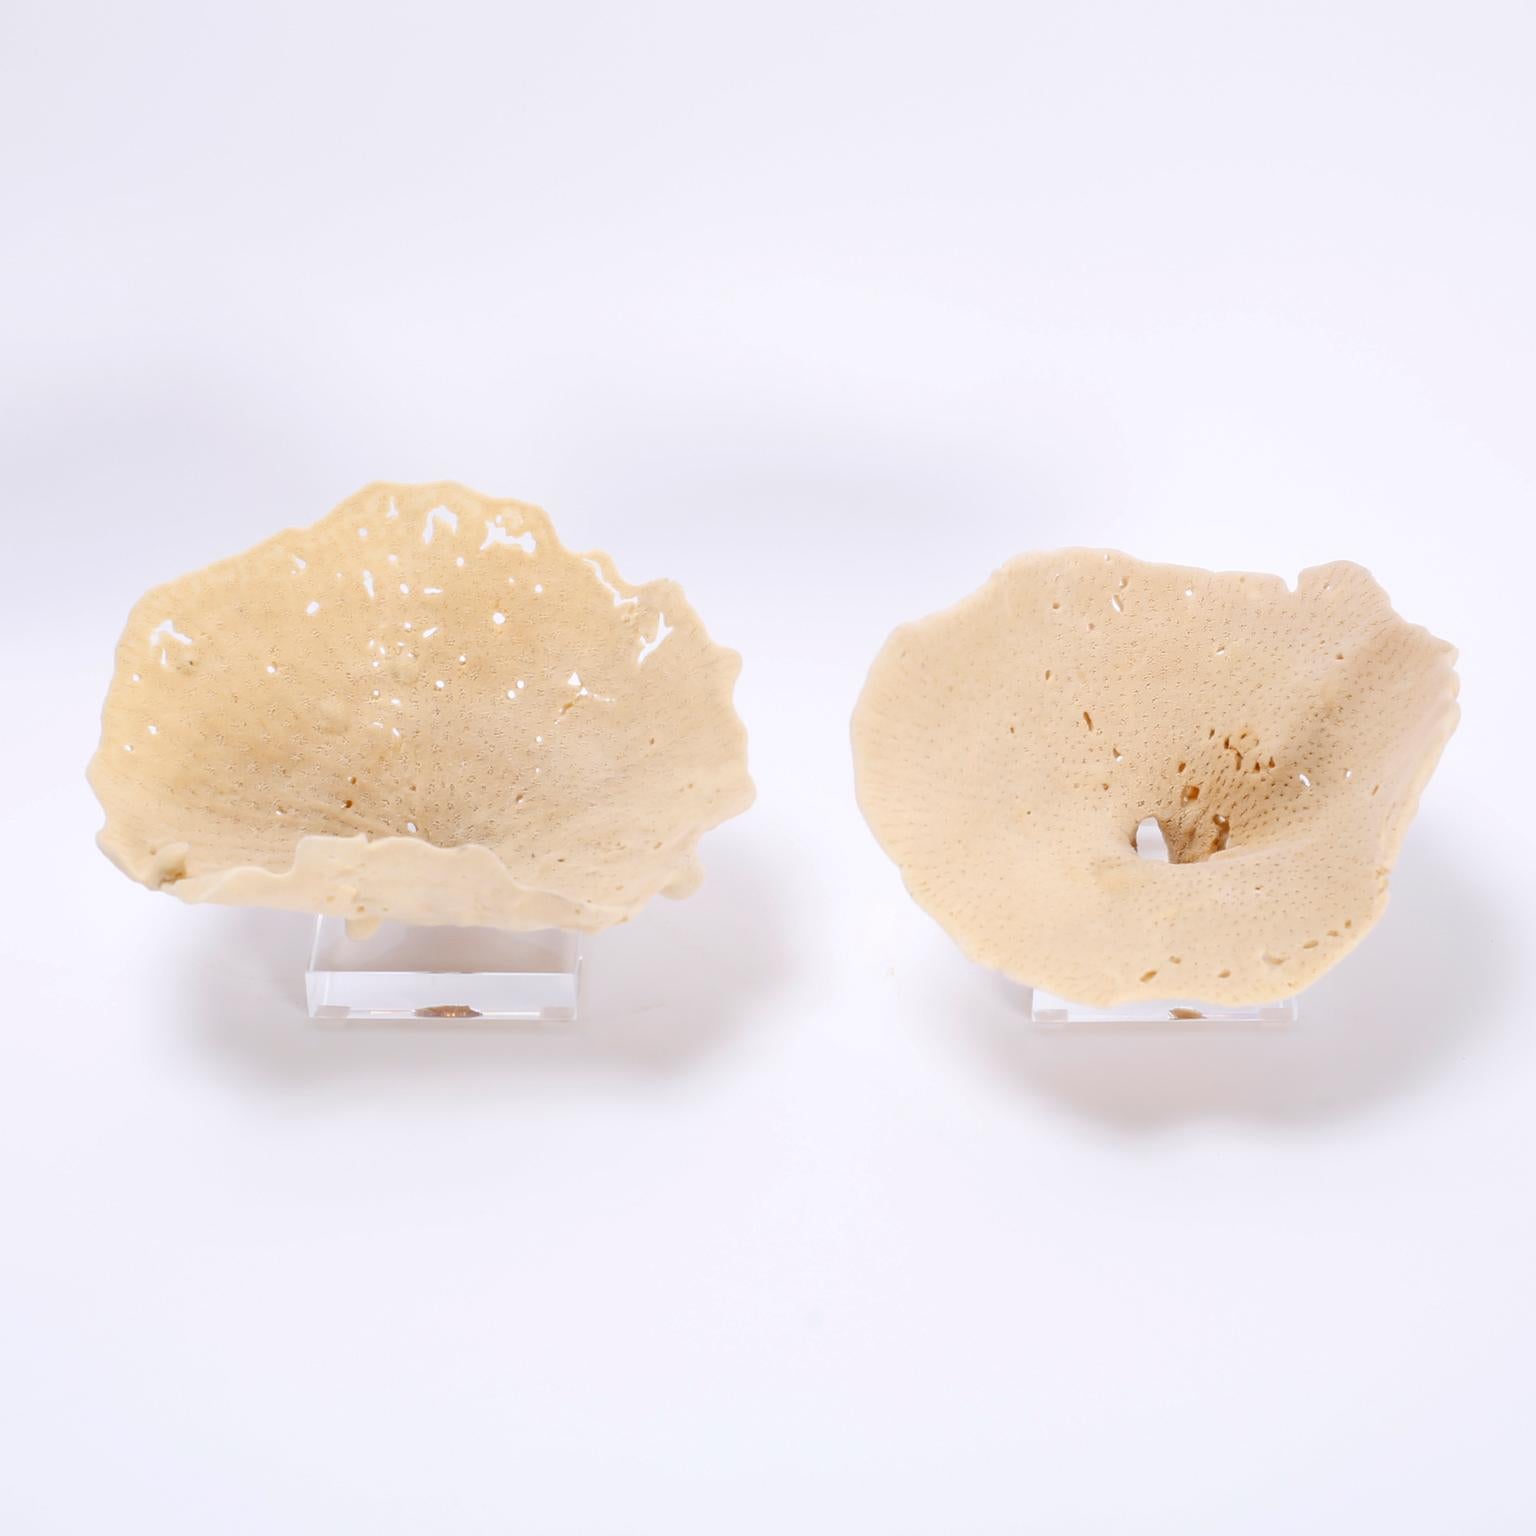 Authentic pair of sea sponges with ocean inspired soothing color and organic texture and form. Presented on Lucite stands to enhance the sculptural elements.
Priced individually.

Measures: Left: H 6.5, W 9.5, D 7
Right: H 6, W 9, D 8.5.